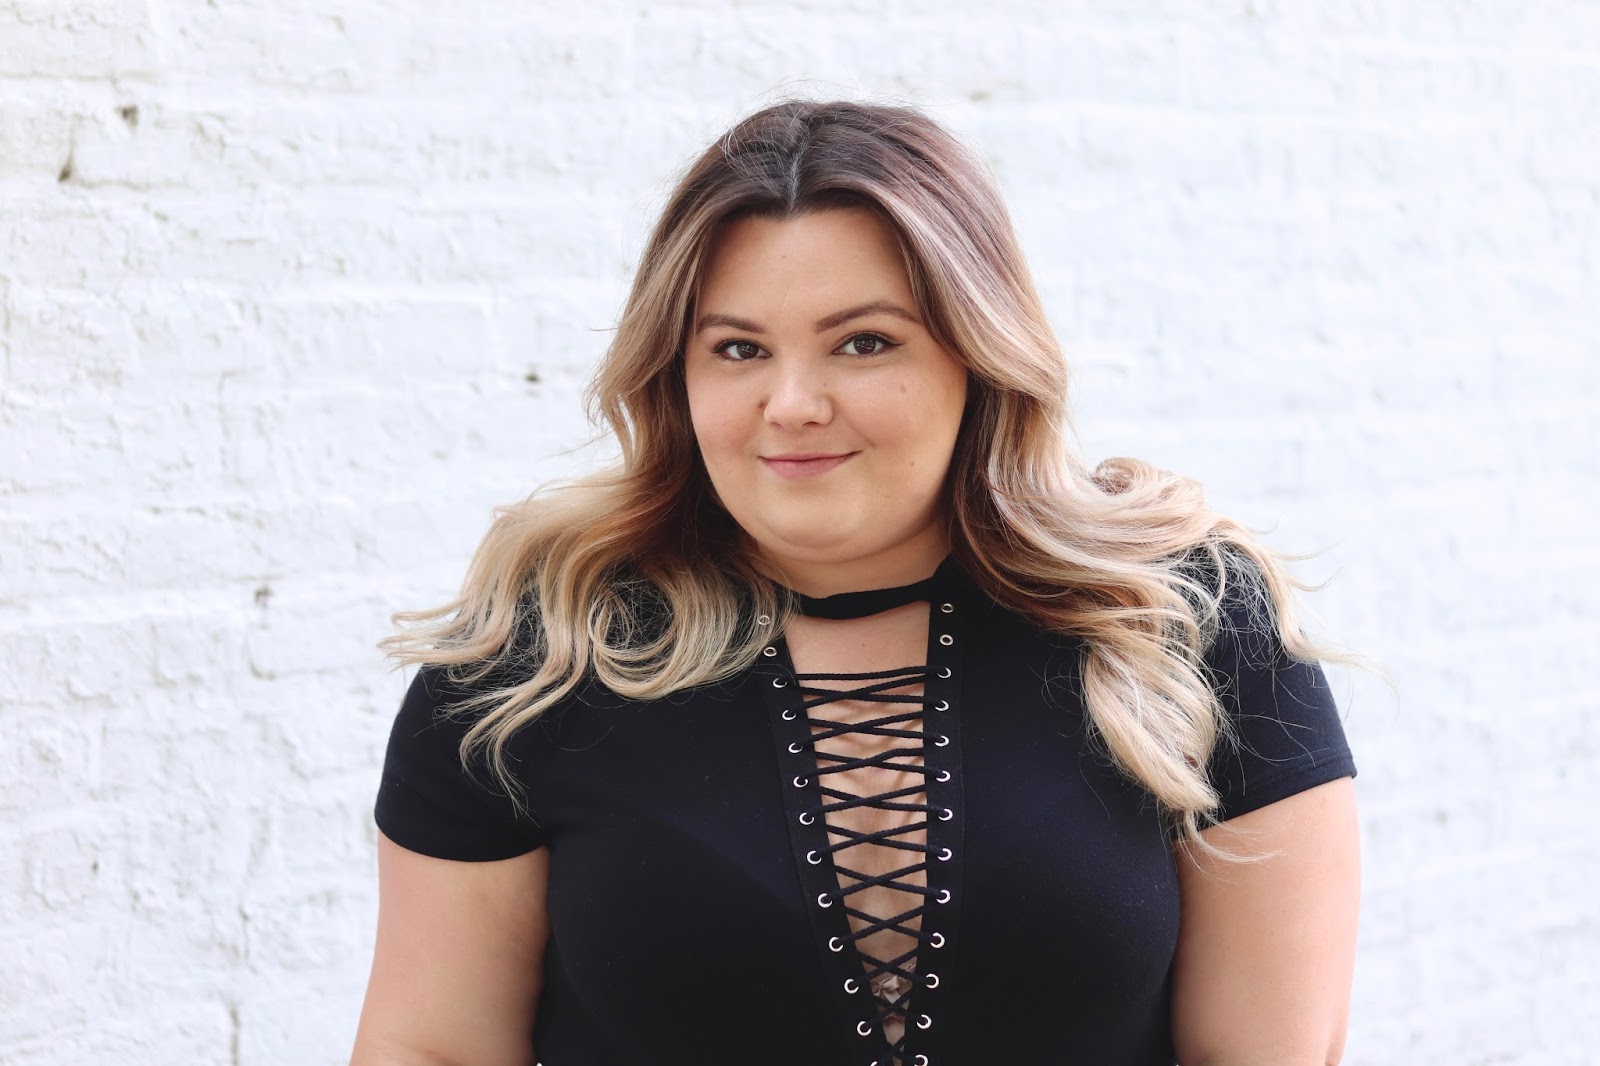 natalie craig, natalie in the city, Chicago plus size fashion blogger, midwest blogger, influencer, fashion nova curve, plus size suede skirts, affordable plus size fashion, plus size, fatshion, curves and confidence, lace up, bombshell look, a night out